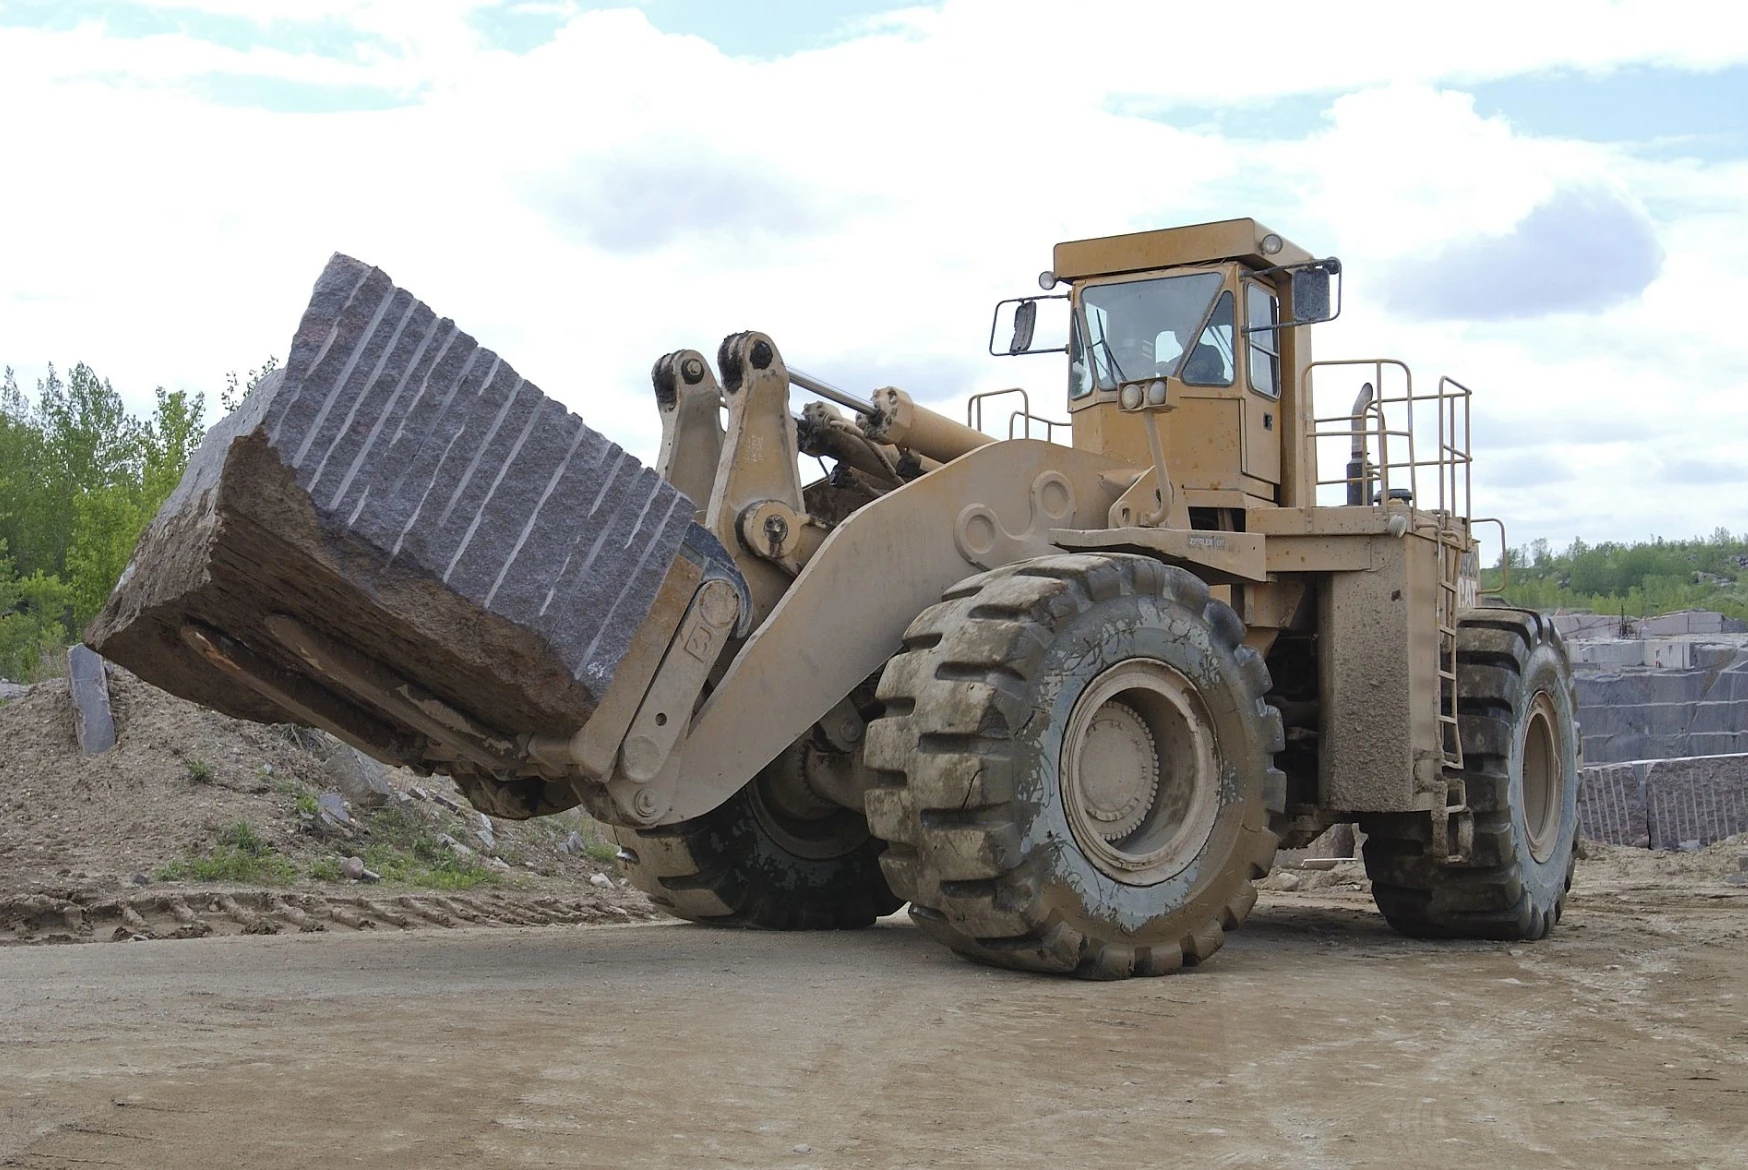 A large wheel loader is dumping rocks into the ground.